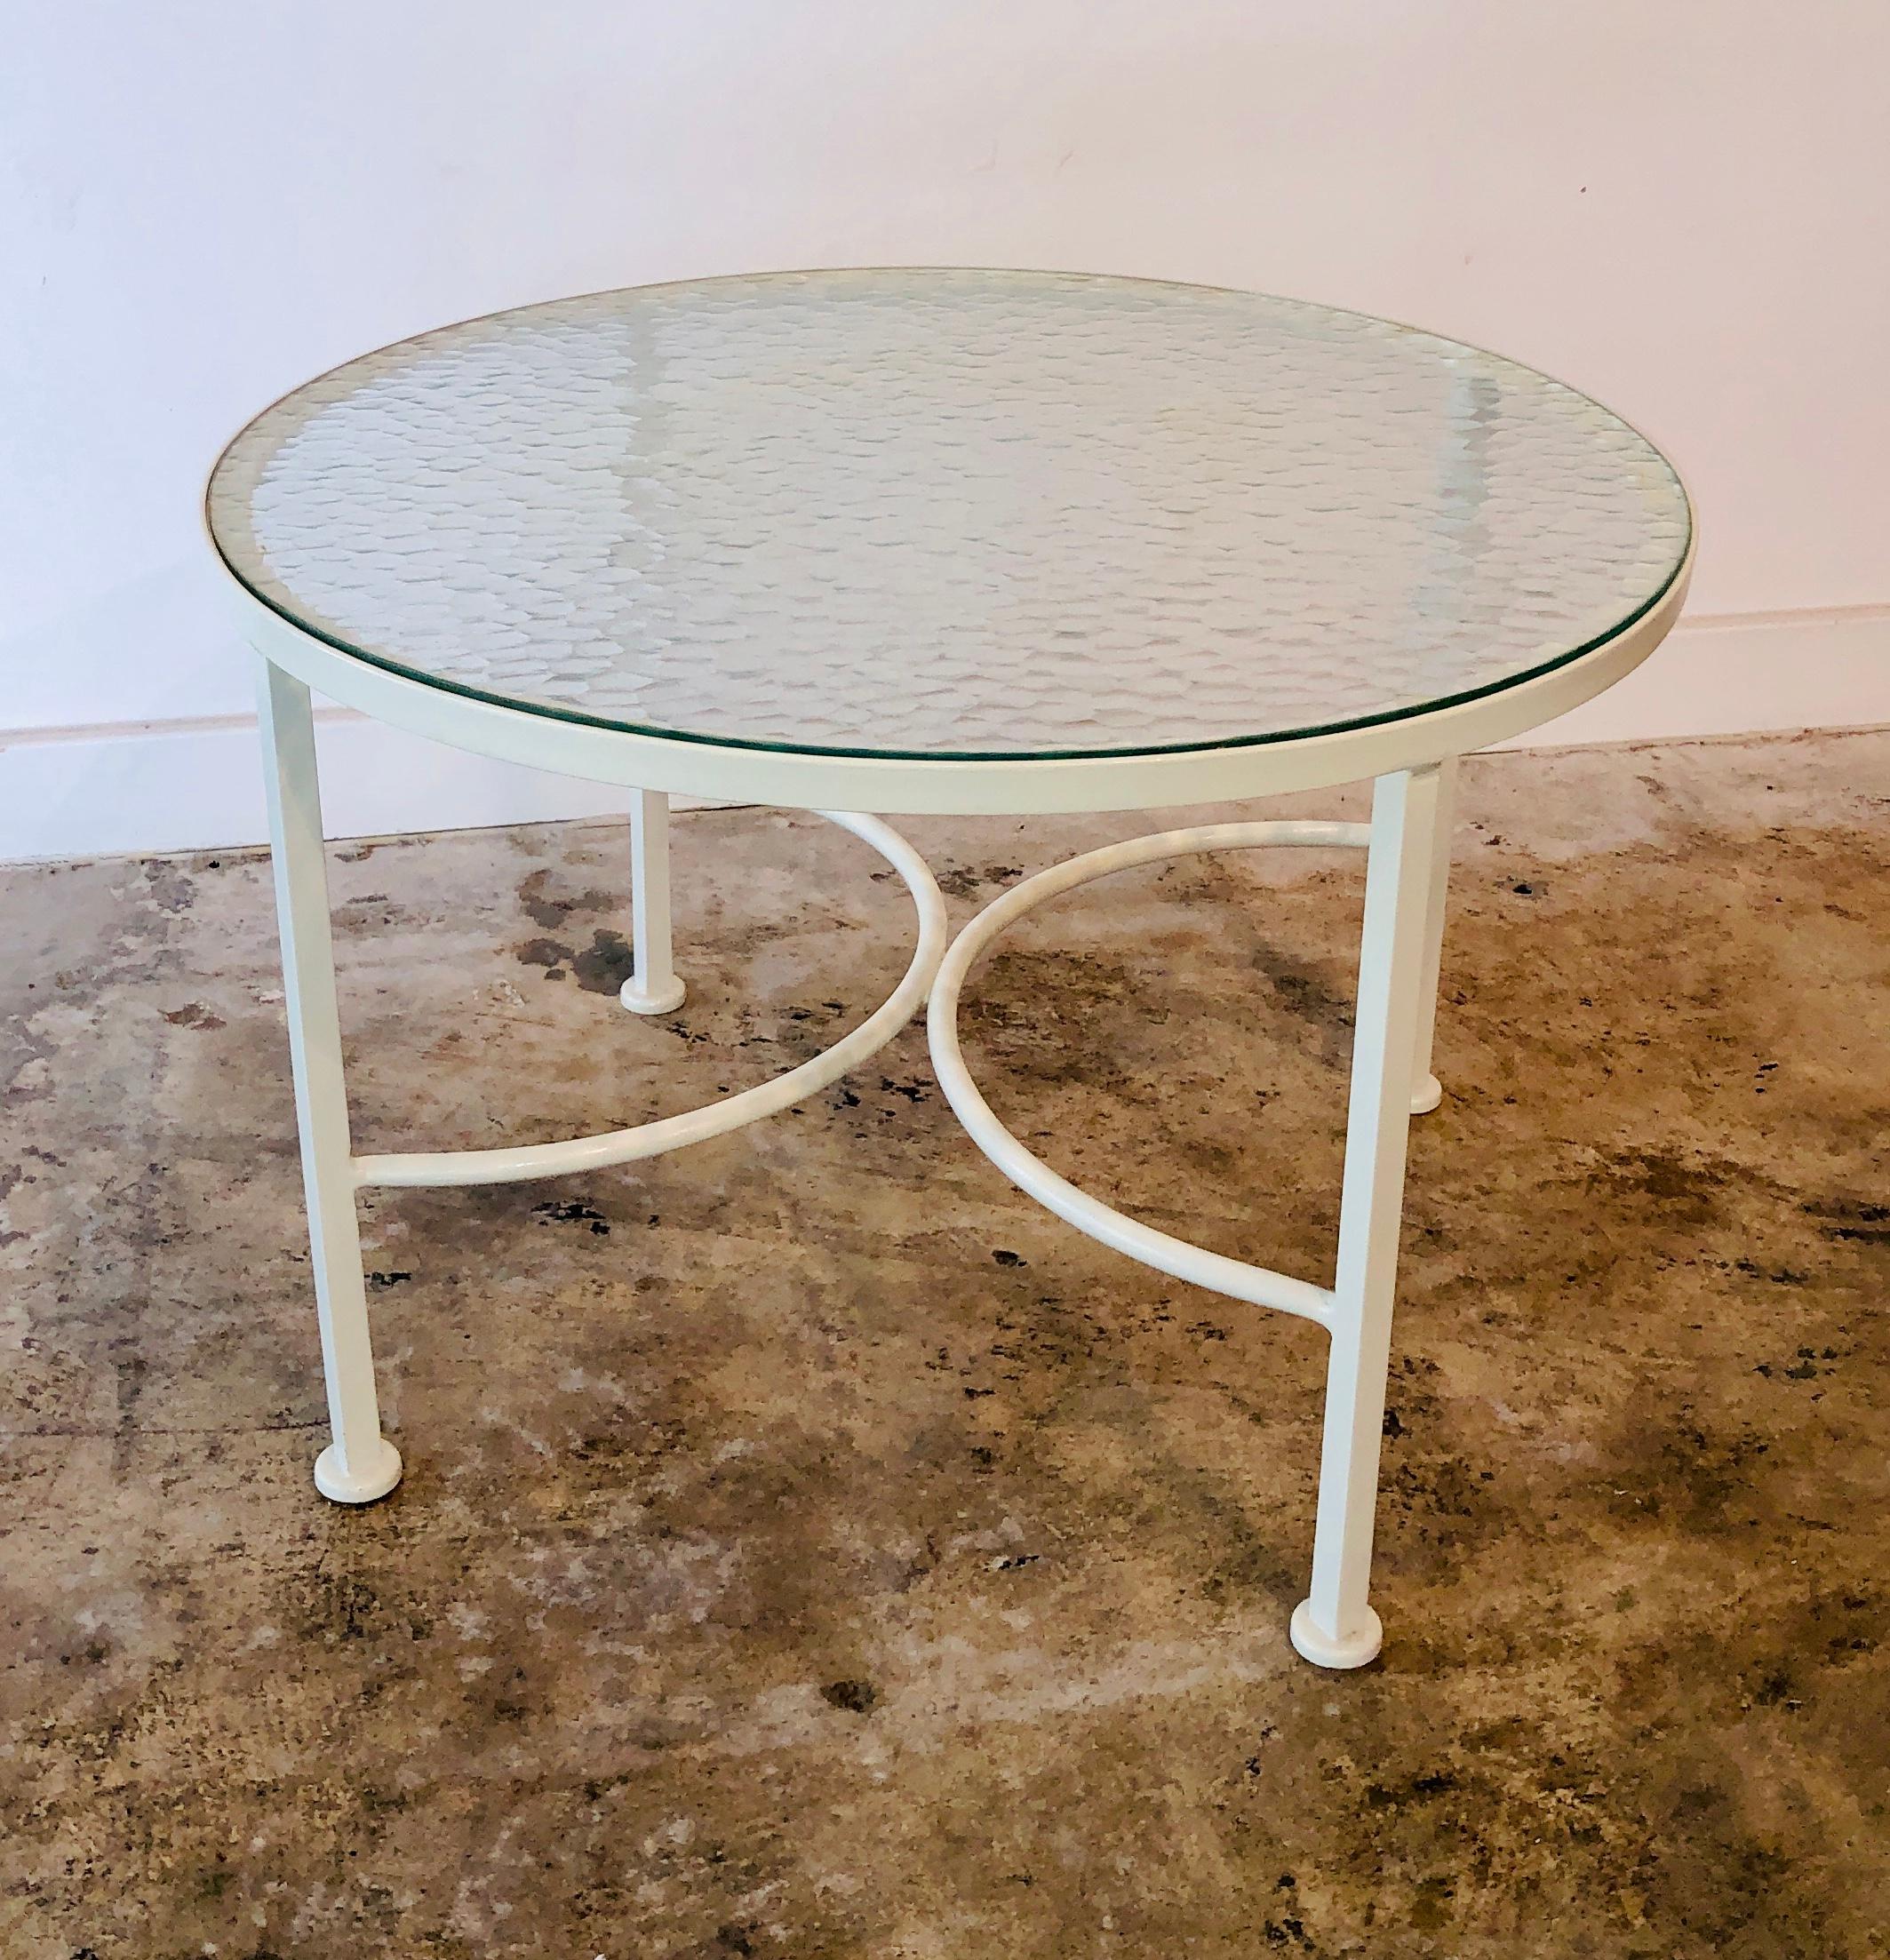 Bob Anderson Newly Enameled White Wrought Iron and Round Glass Patio Side Table In Good Condition For Sale In Houston, TX